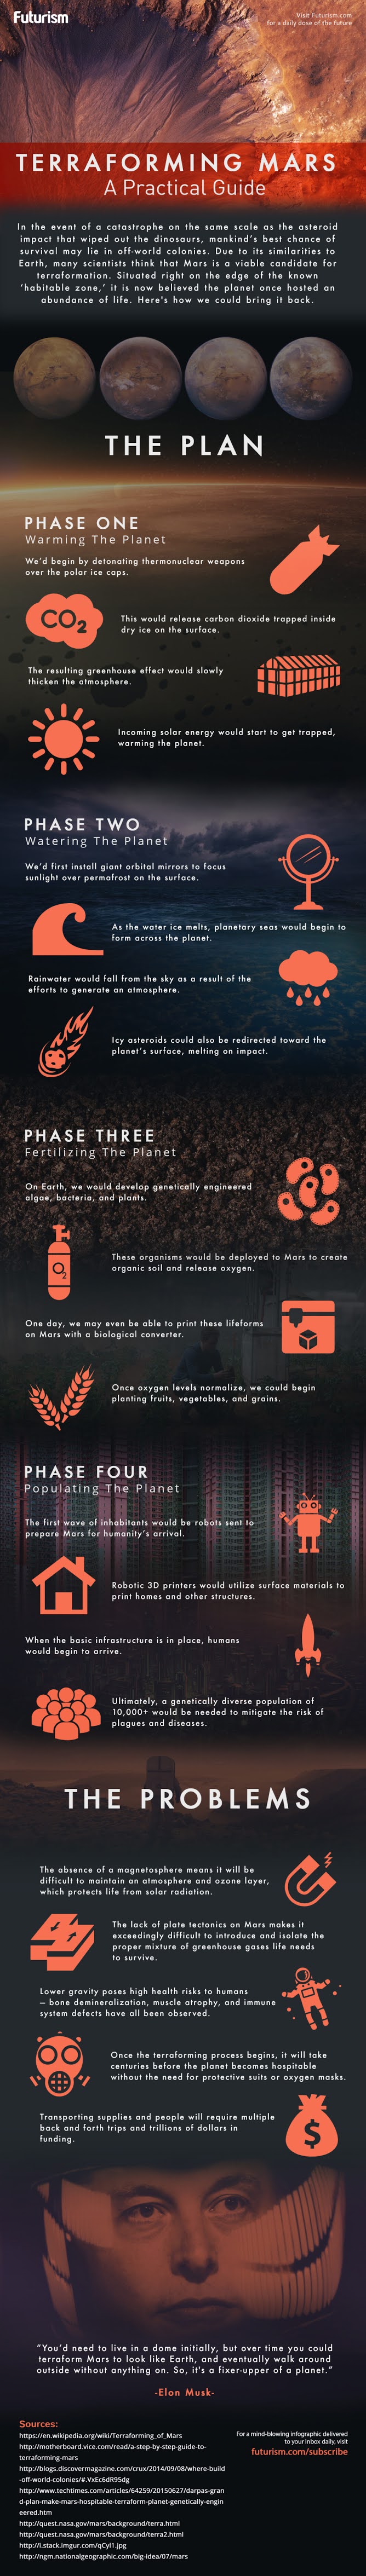 How We Can Make the Red Planet Habitable? - Infographic